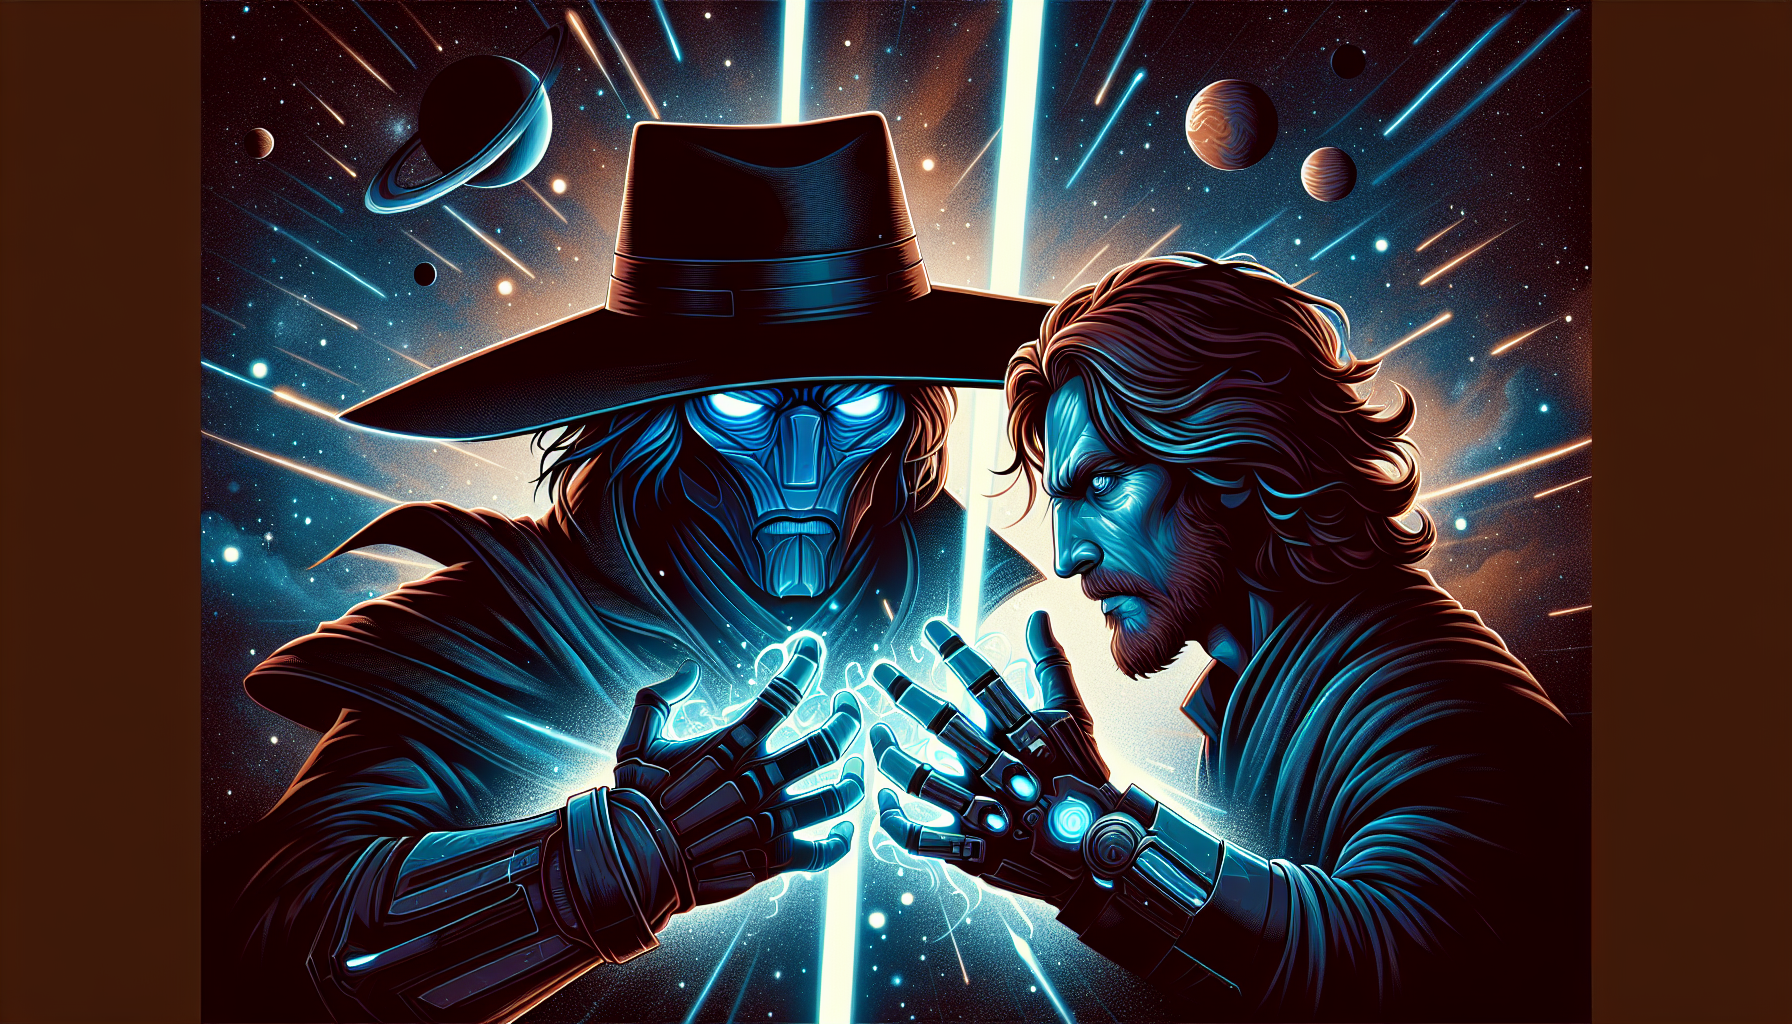 A thrilling duel between an enigmatic bounty hunter with large wide-brimmed hat, sharp facial features, and blue skin facing off against a stoic monk-like figure, with wavy auburn hair, hands occupied with a glowing energy blade. They are seemingly suspended in a sea of stars, surrounded by otherworldly planets and galactic wonders. Add a touch of modern flair into the artistic style while retaining the vibe of an epic space opera.